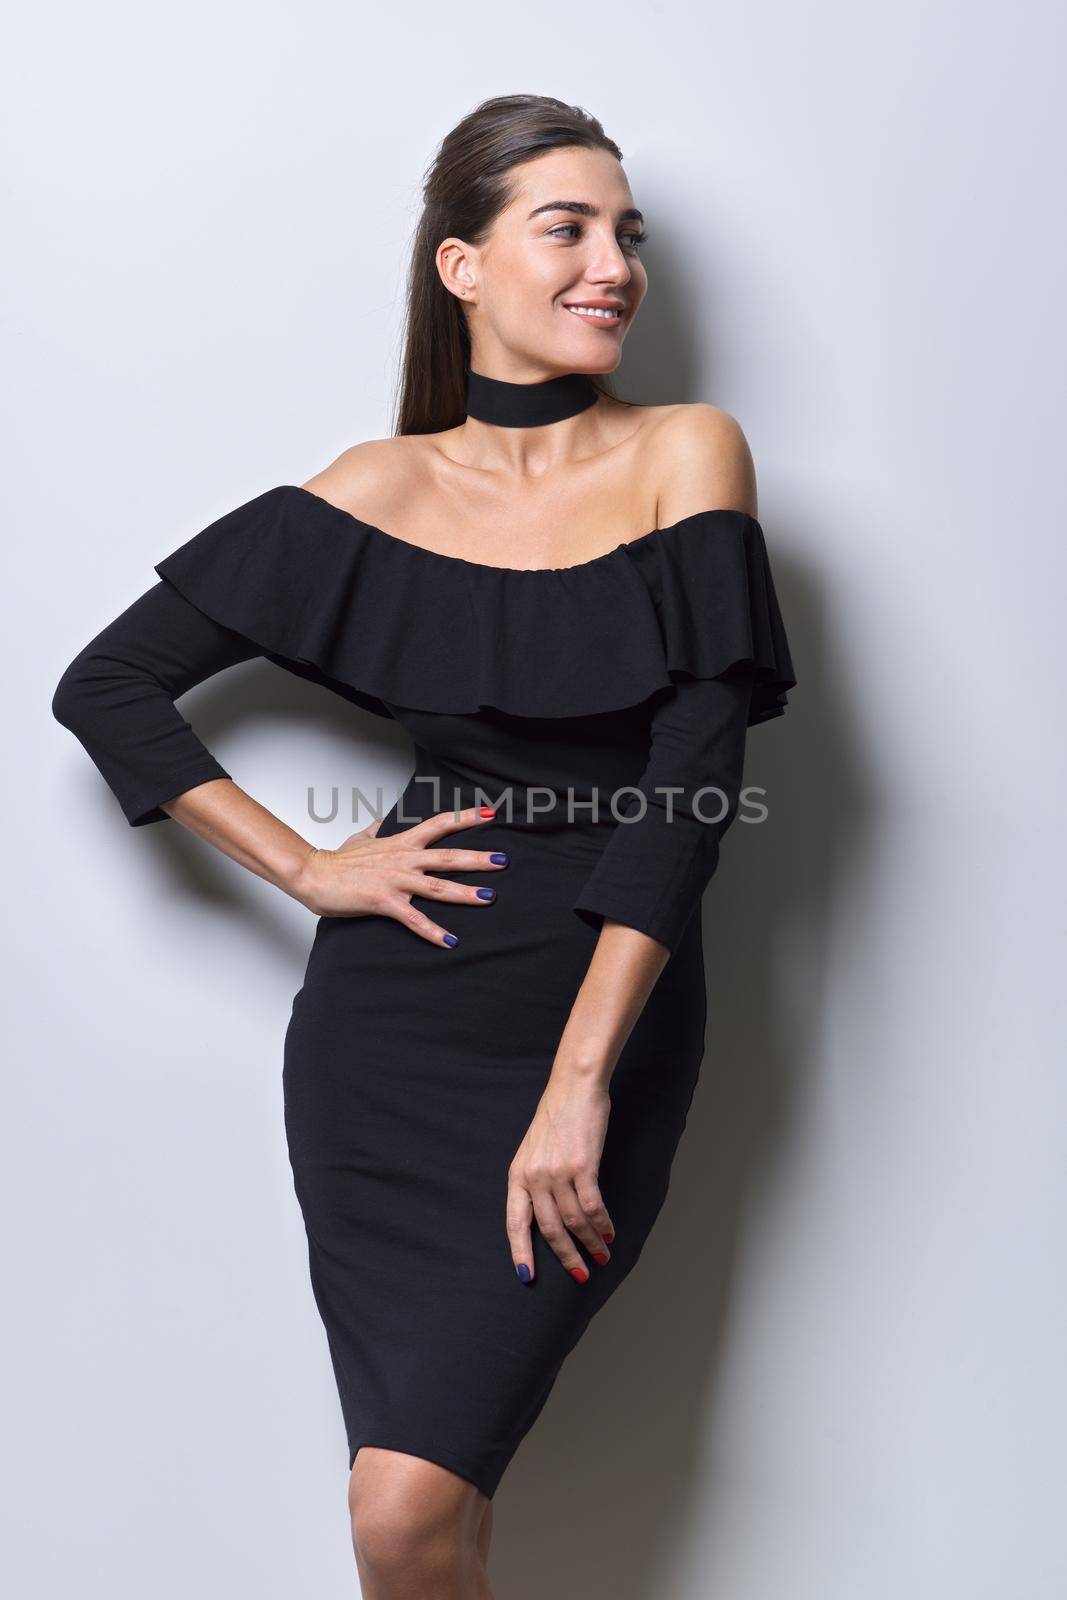 Beauty fashion portrait of young beautiful woman in small black dress with bare shoulders, long straight healthy hair with choker accessory on neck on white background